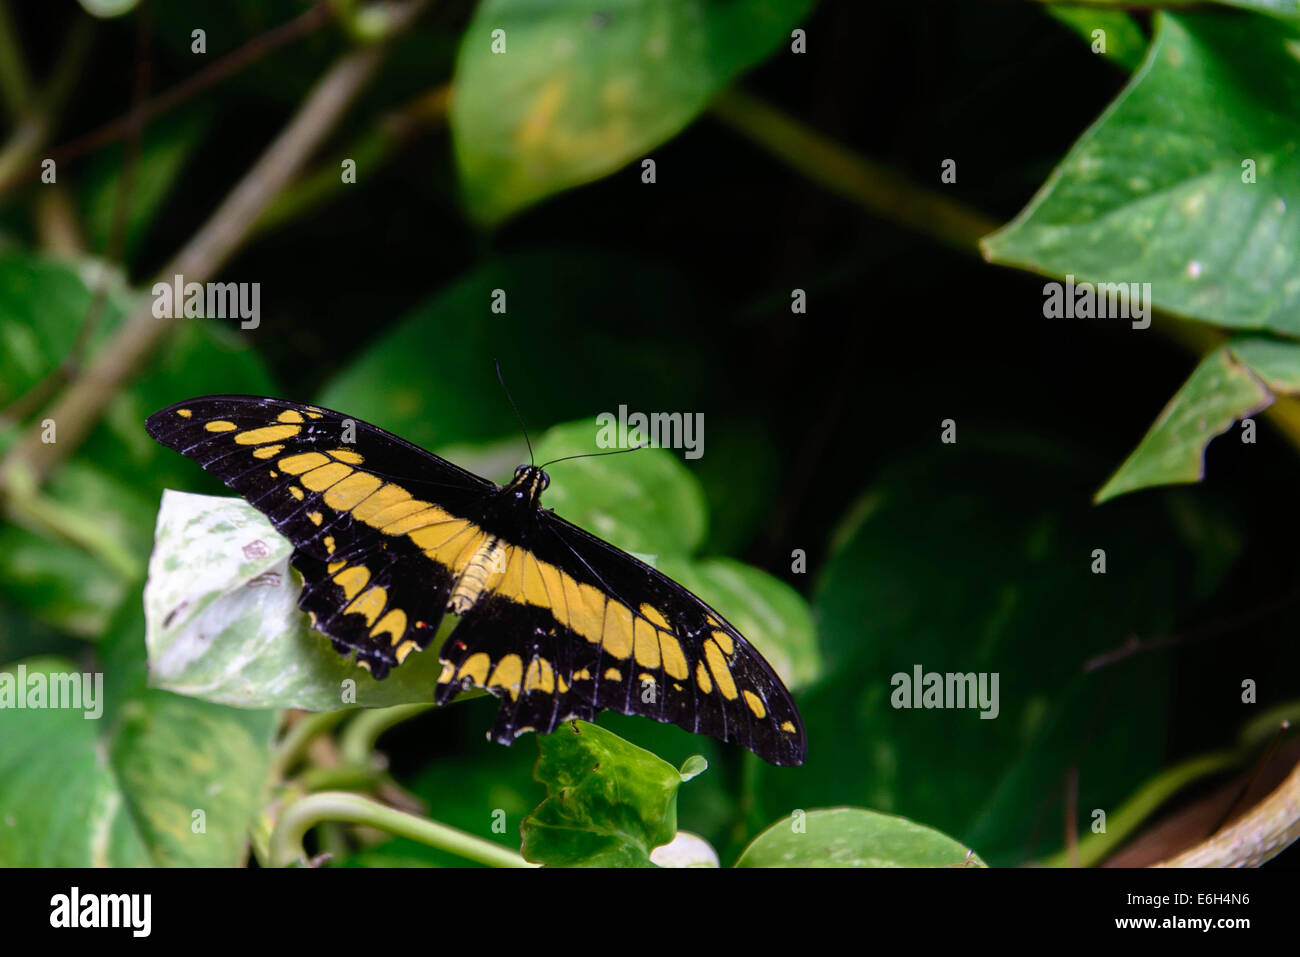 black and yellow Giant Swallowtail butterfly in nature Stock Photo